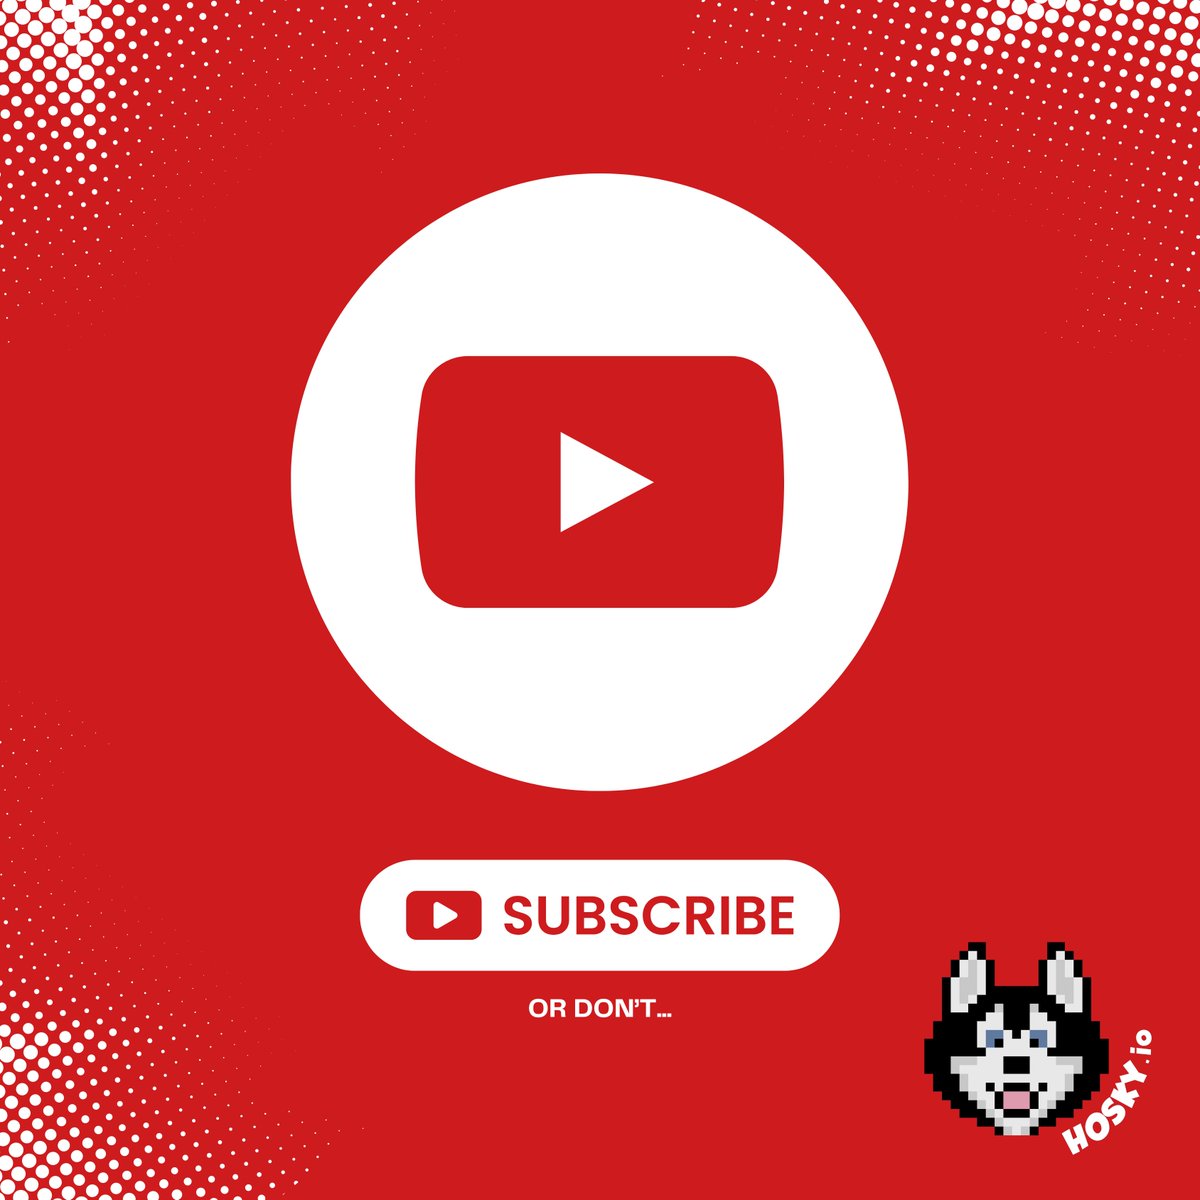 Follow us on YouTube! WARNING: Excessive exposure to HOSKY has been linked to a loss of brain cells and extreme sensitivity to centralization. youtube.com/@hosky_io